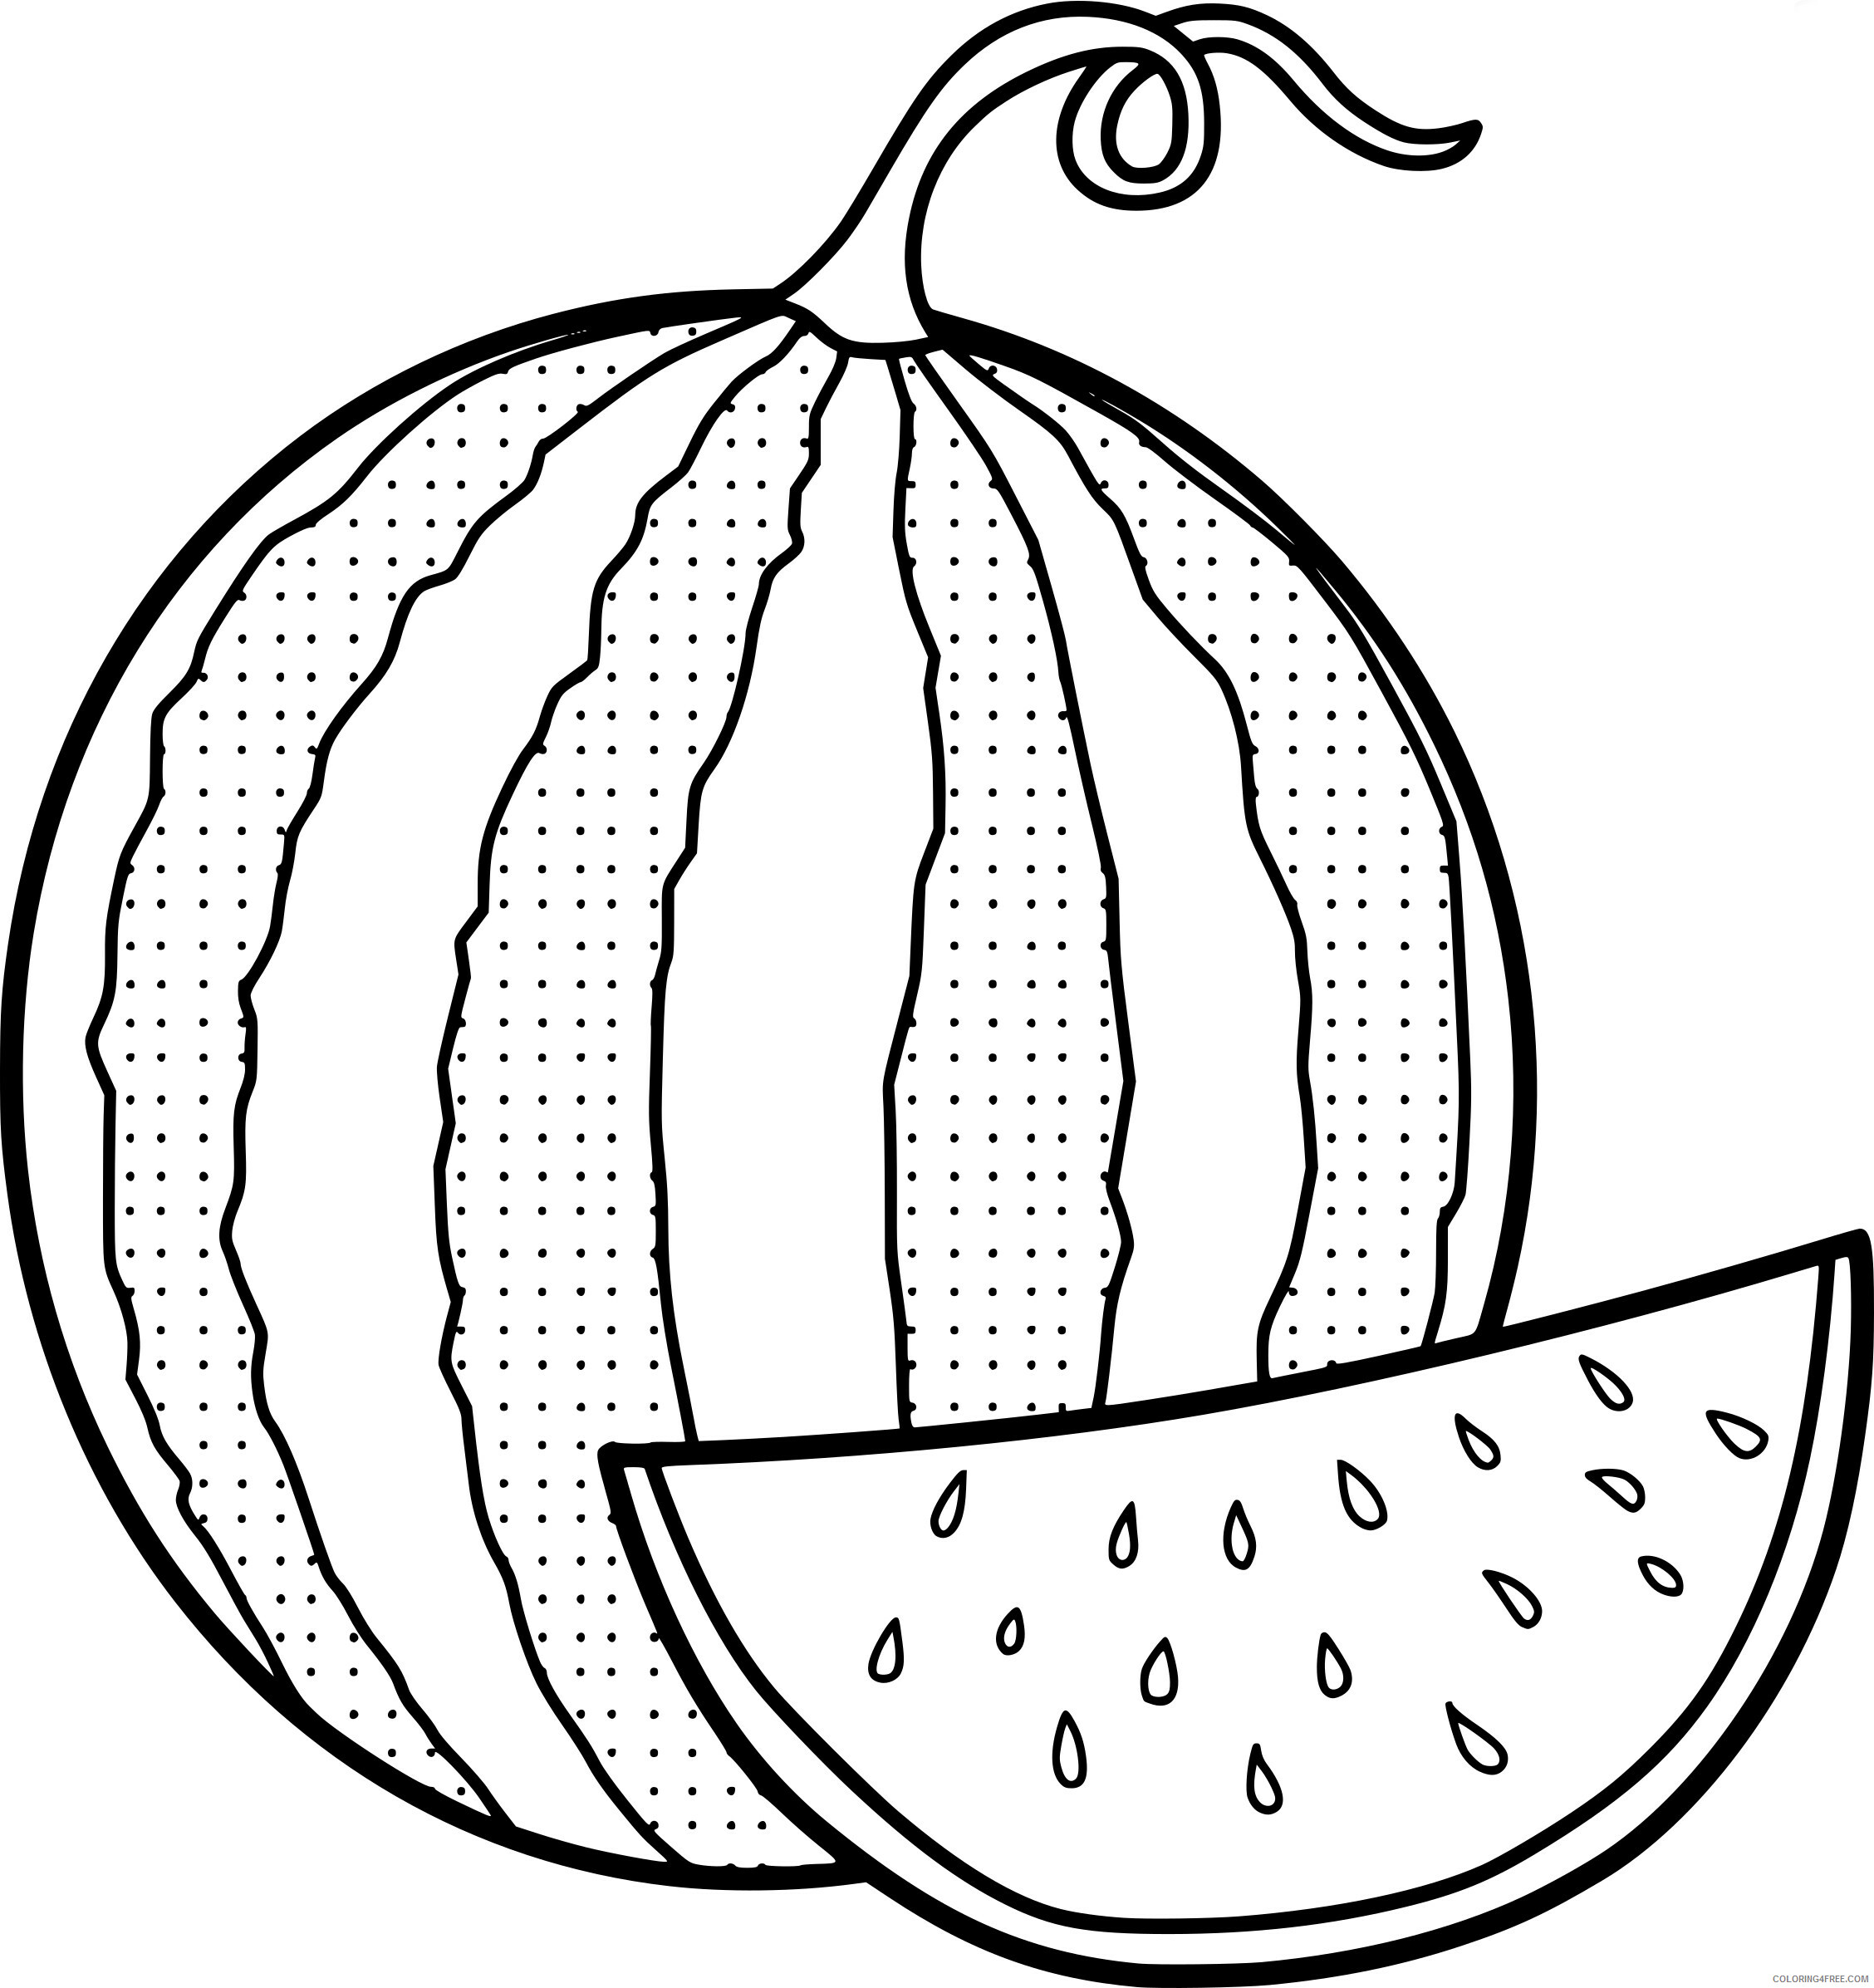 Watermelon Coloring Pages Fruits Food Free Watermelon Printable 2021 435 Coloring4free